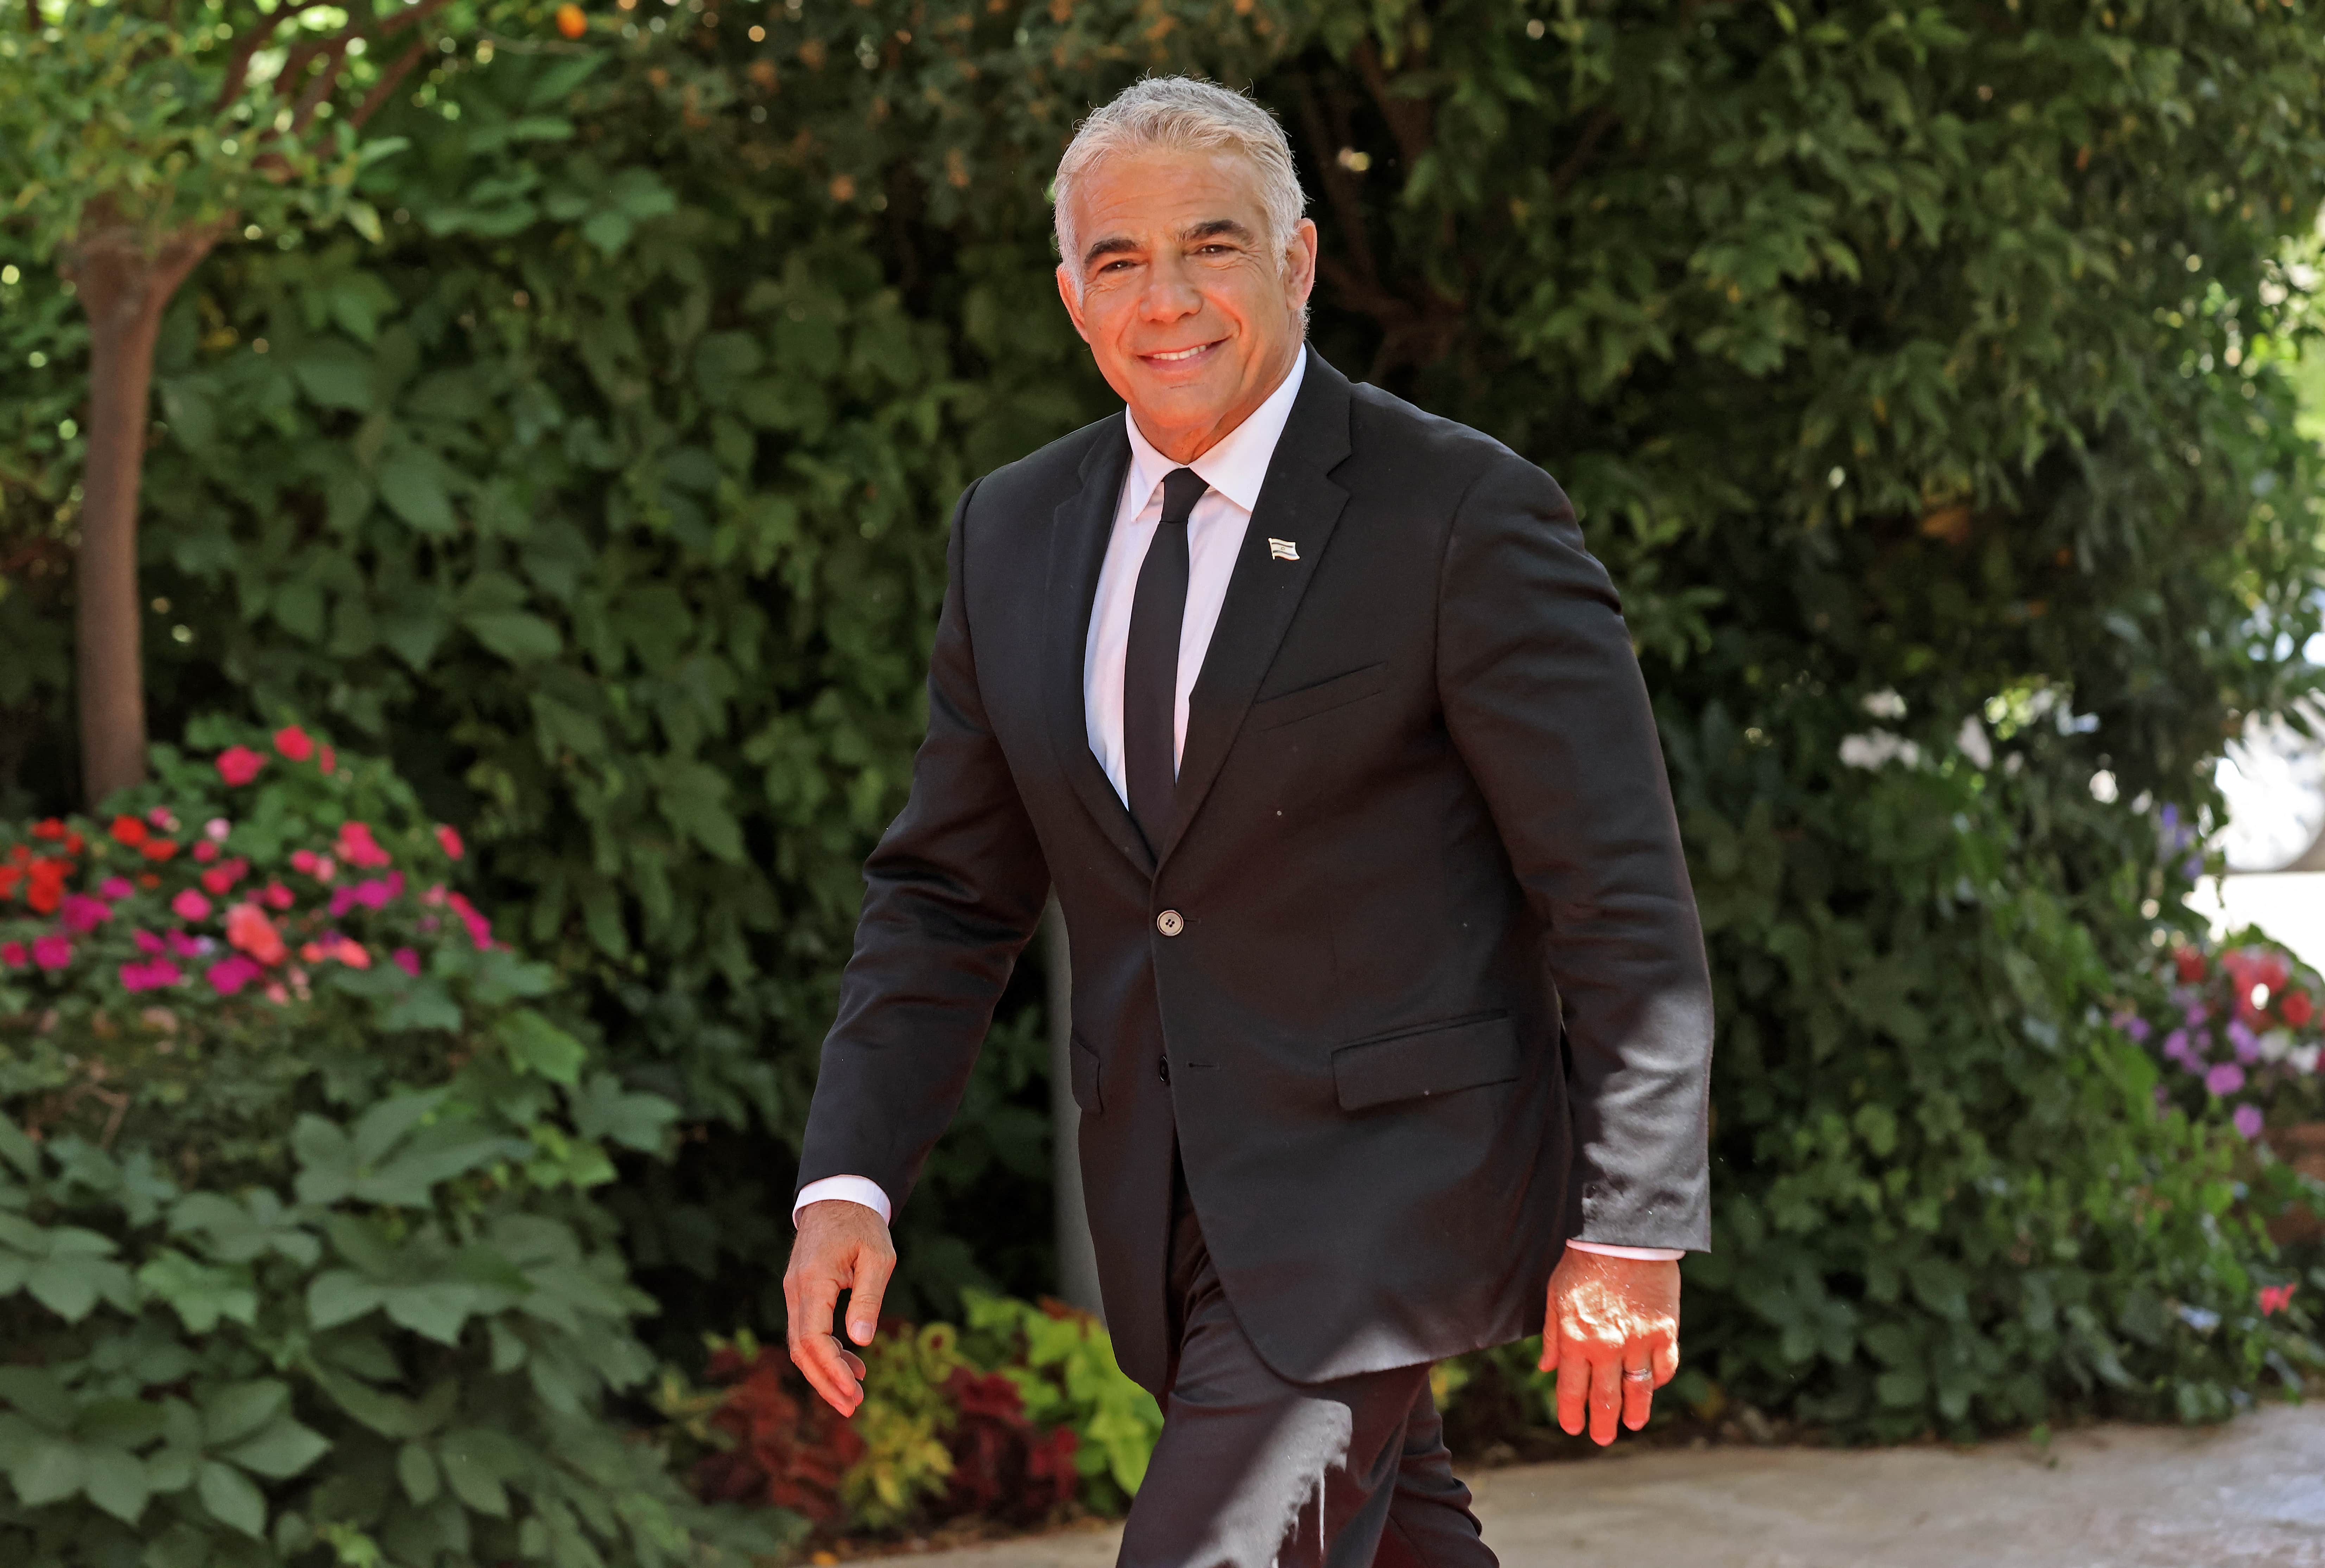 Leader of Israel's Yesh Atid party Yair Lapid arrives to the President's residence in Jerusalem for a picture, on June 14, 2021, a day after a new coalition government was voted in. (AFP)